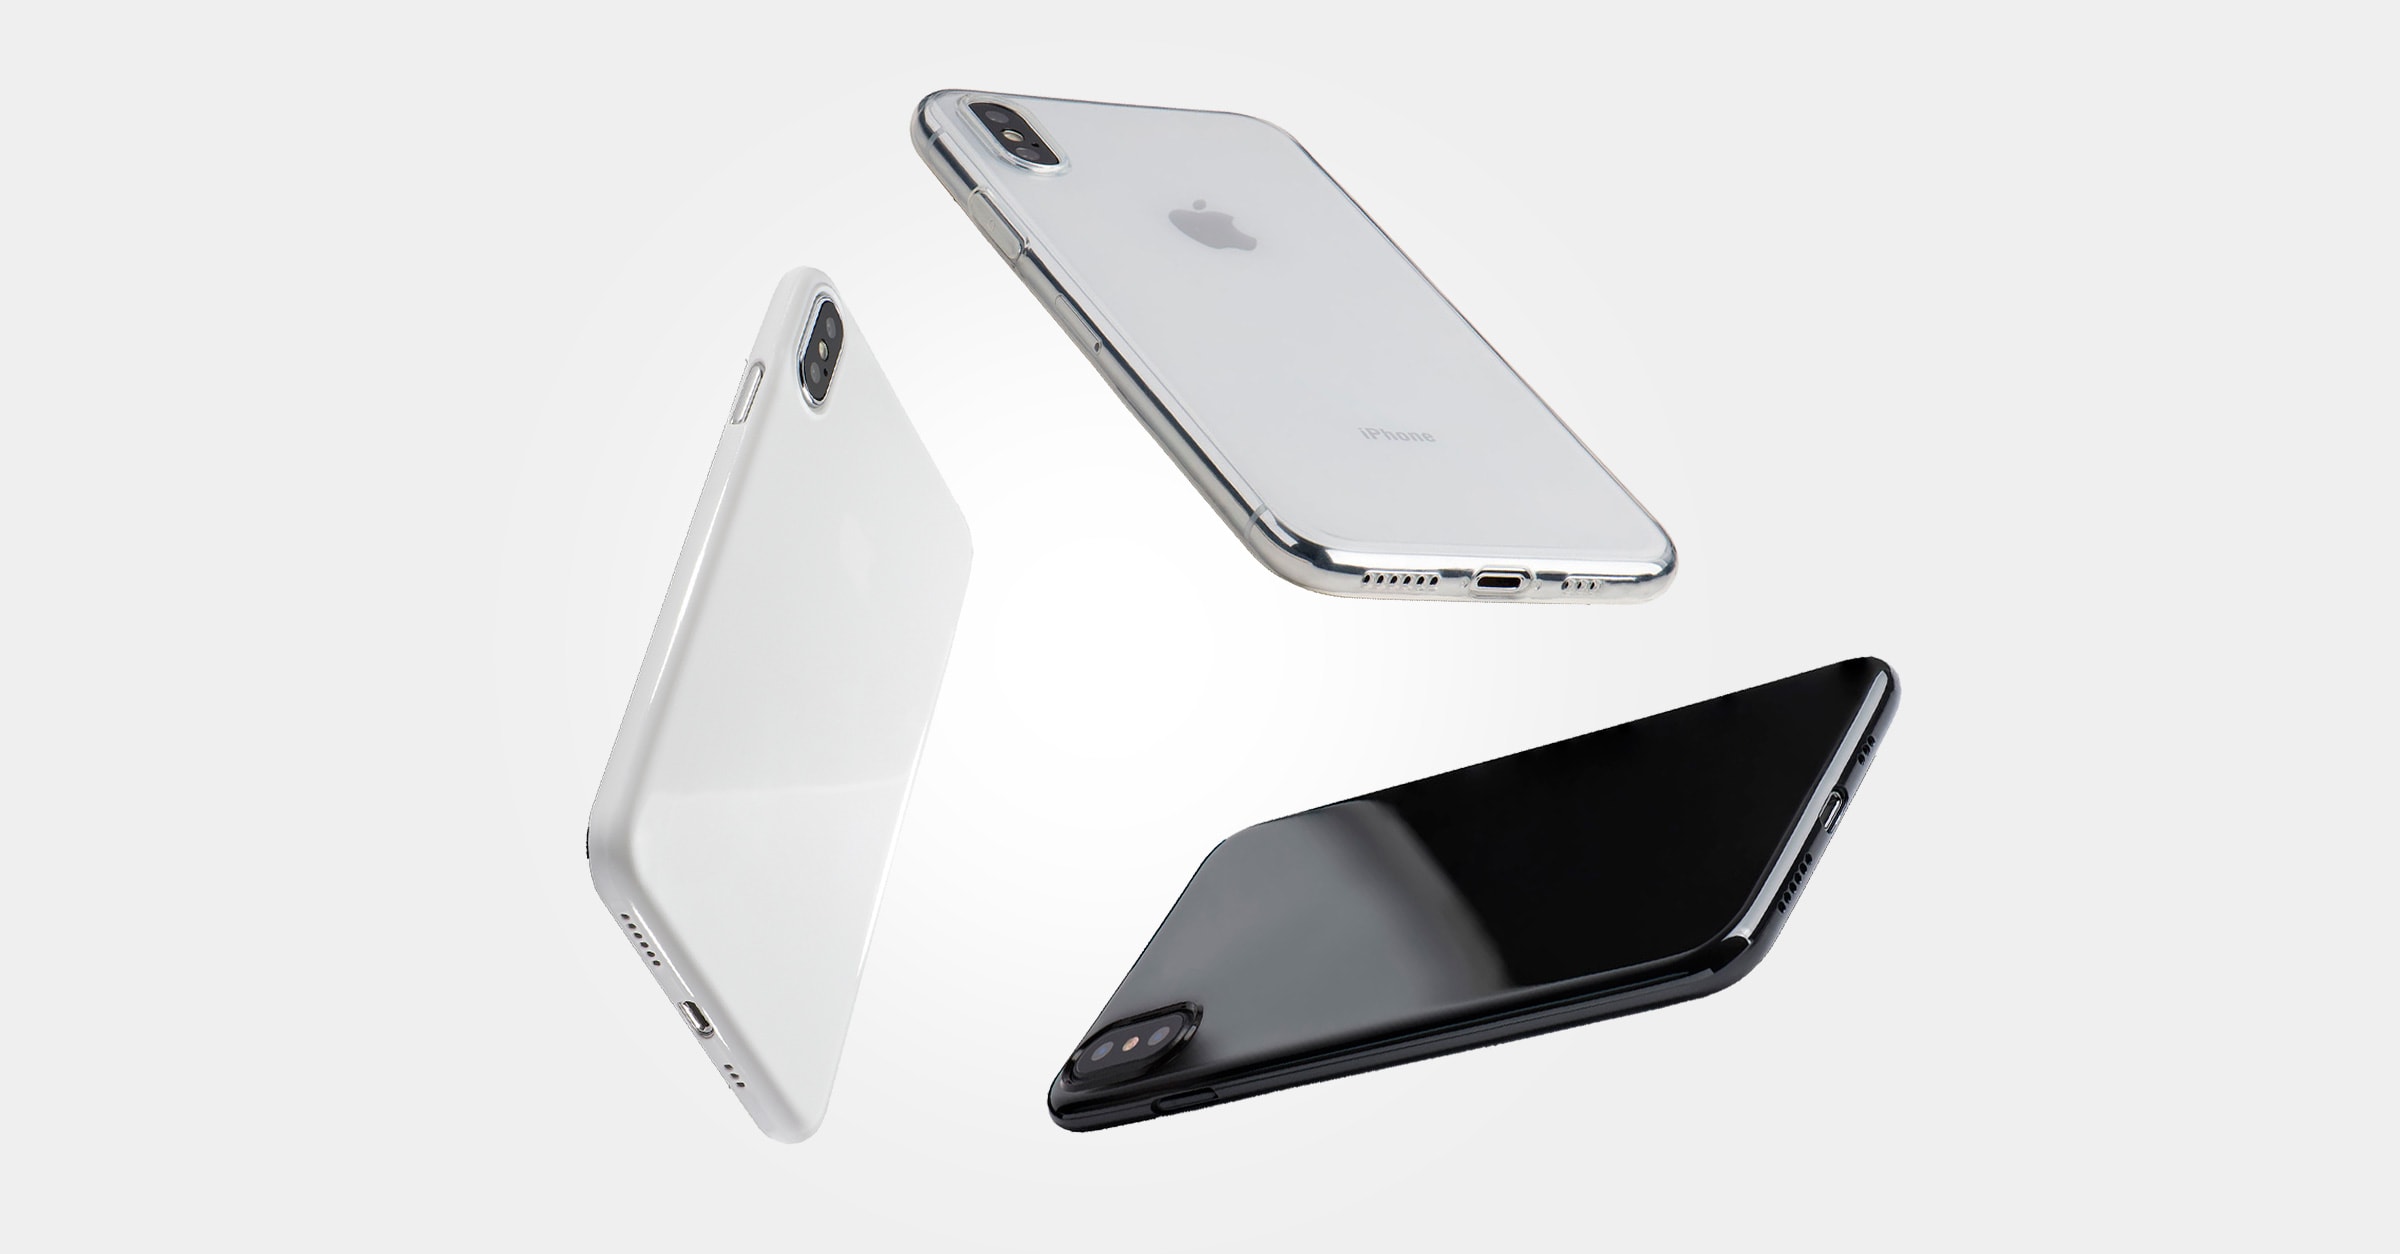 Totallee's ultra thin cases protect any iPhone without sacrificing its subtle look and feel.